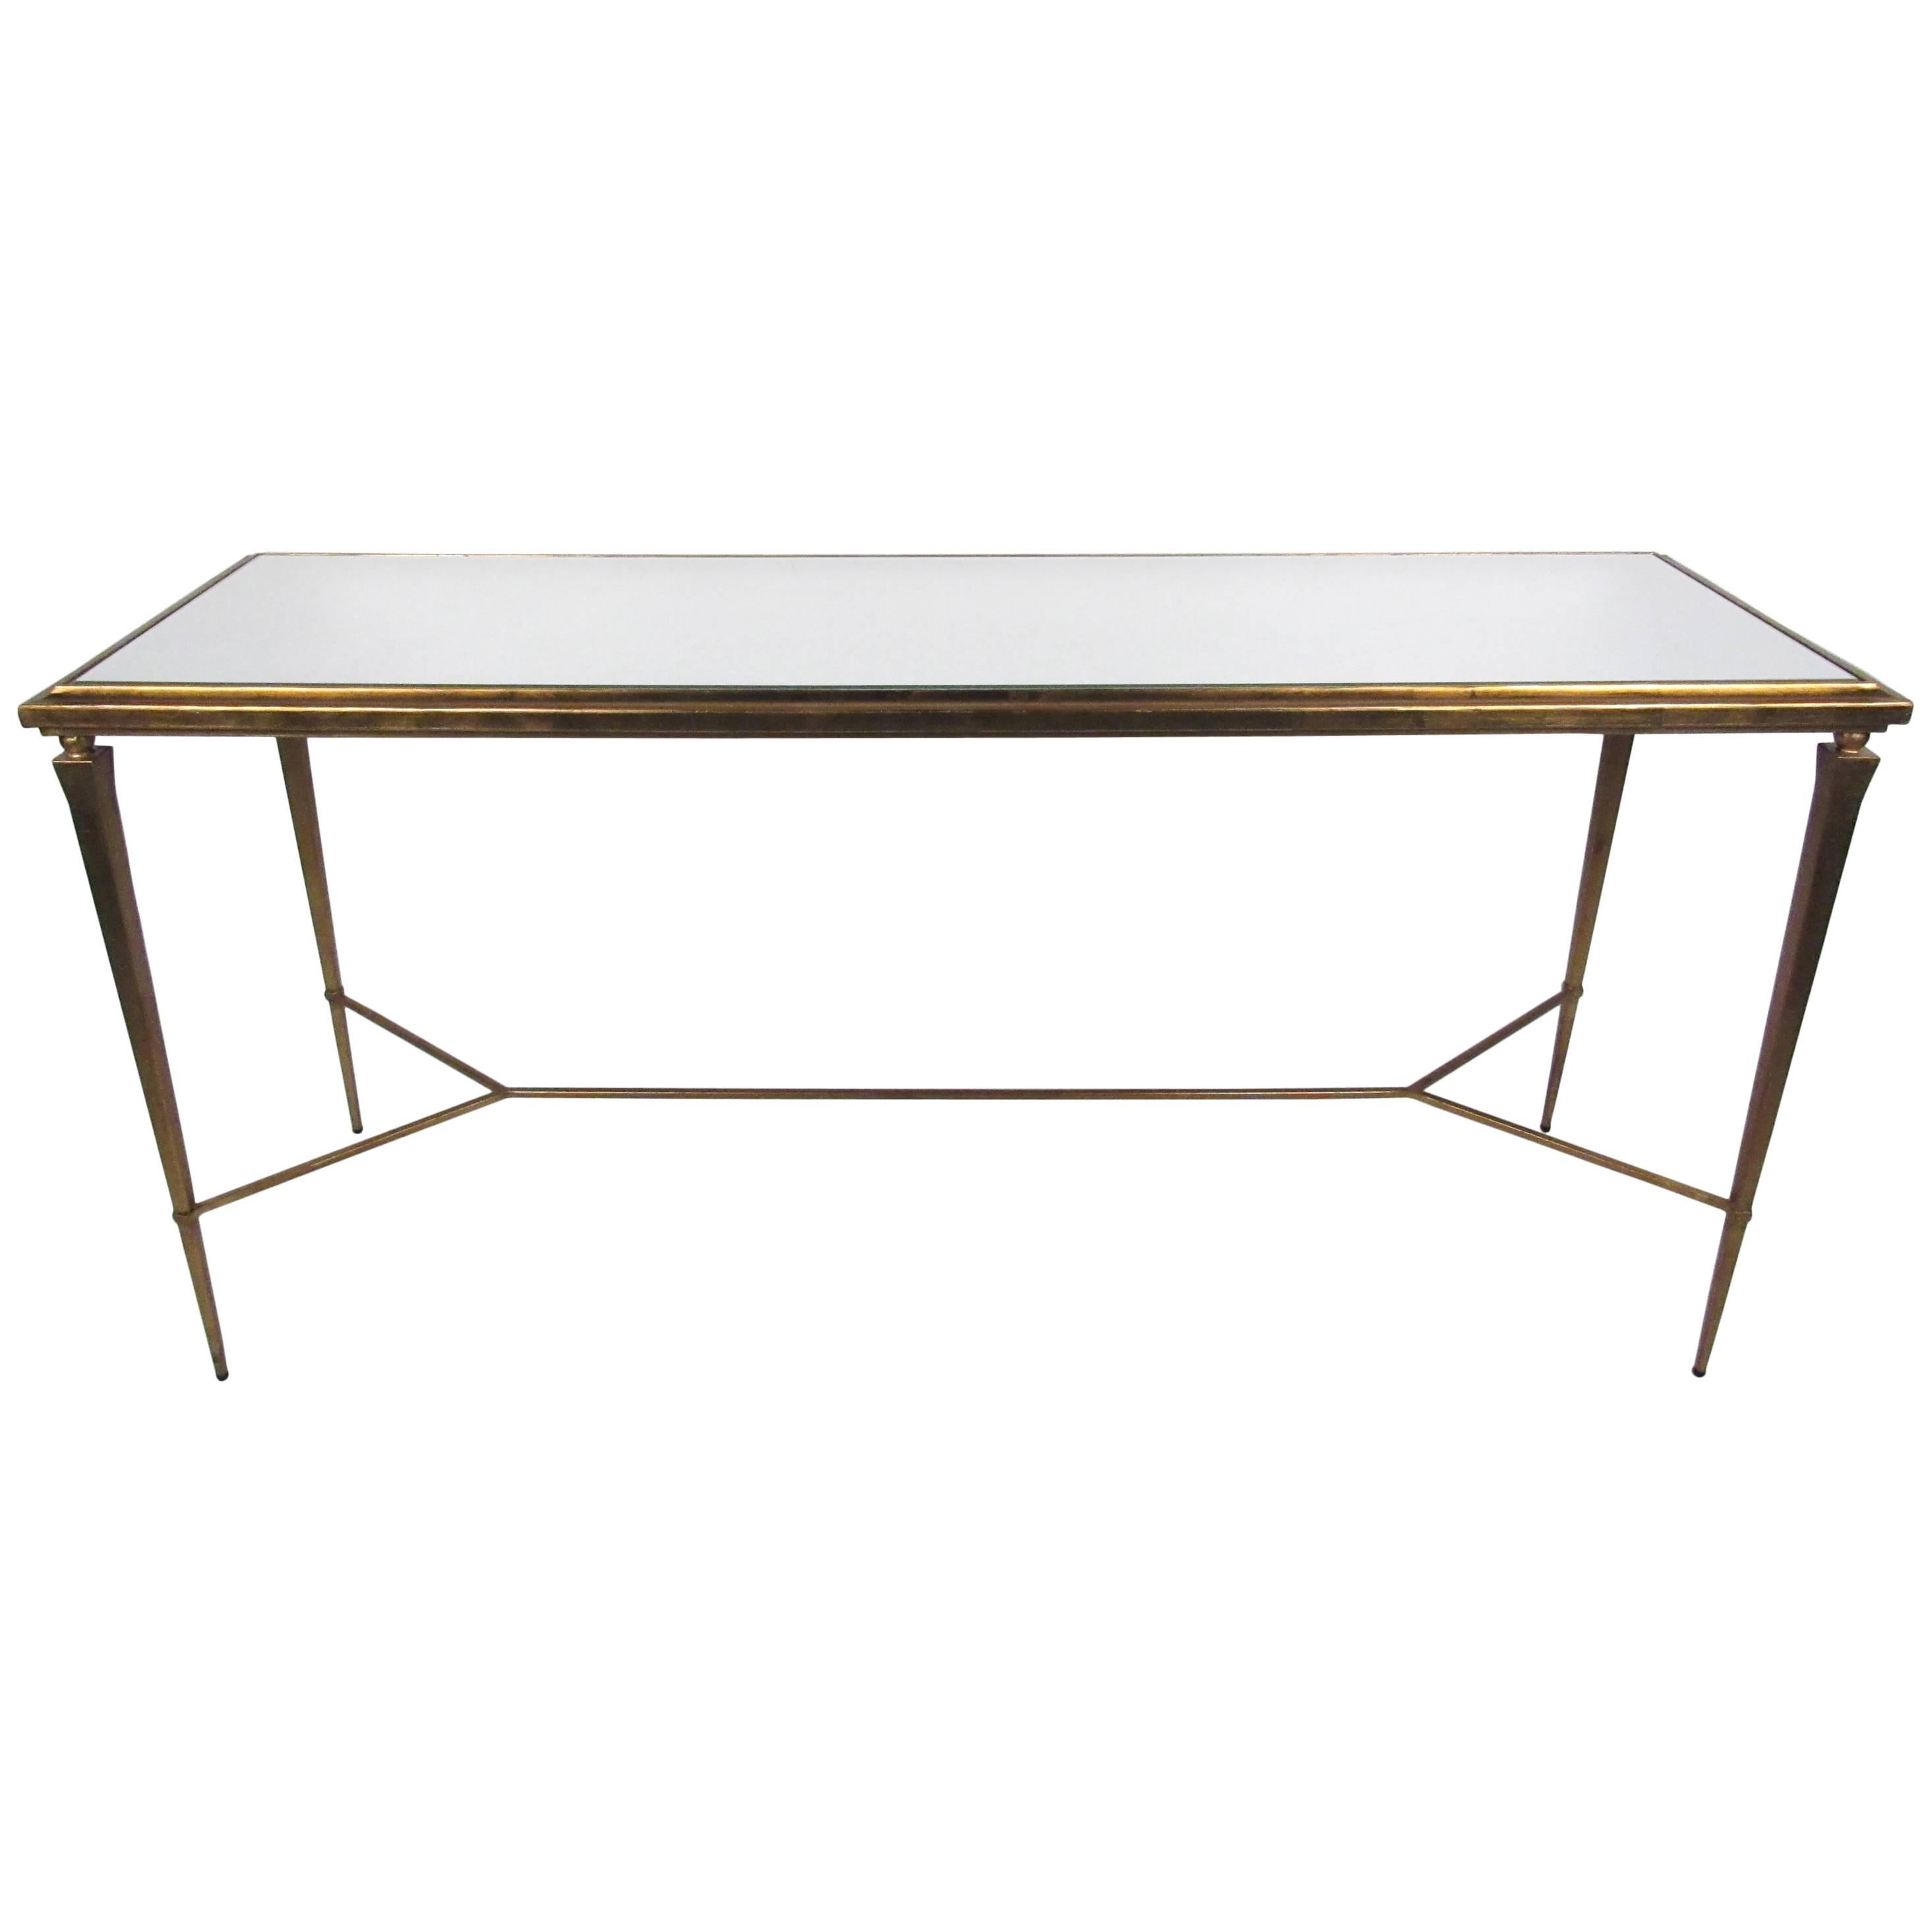 Mid-Century Gold Leaf Style Mirrored Console Table